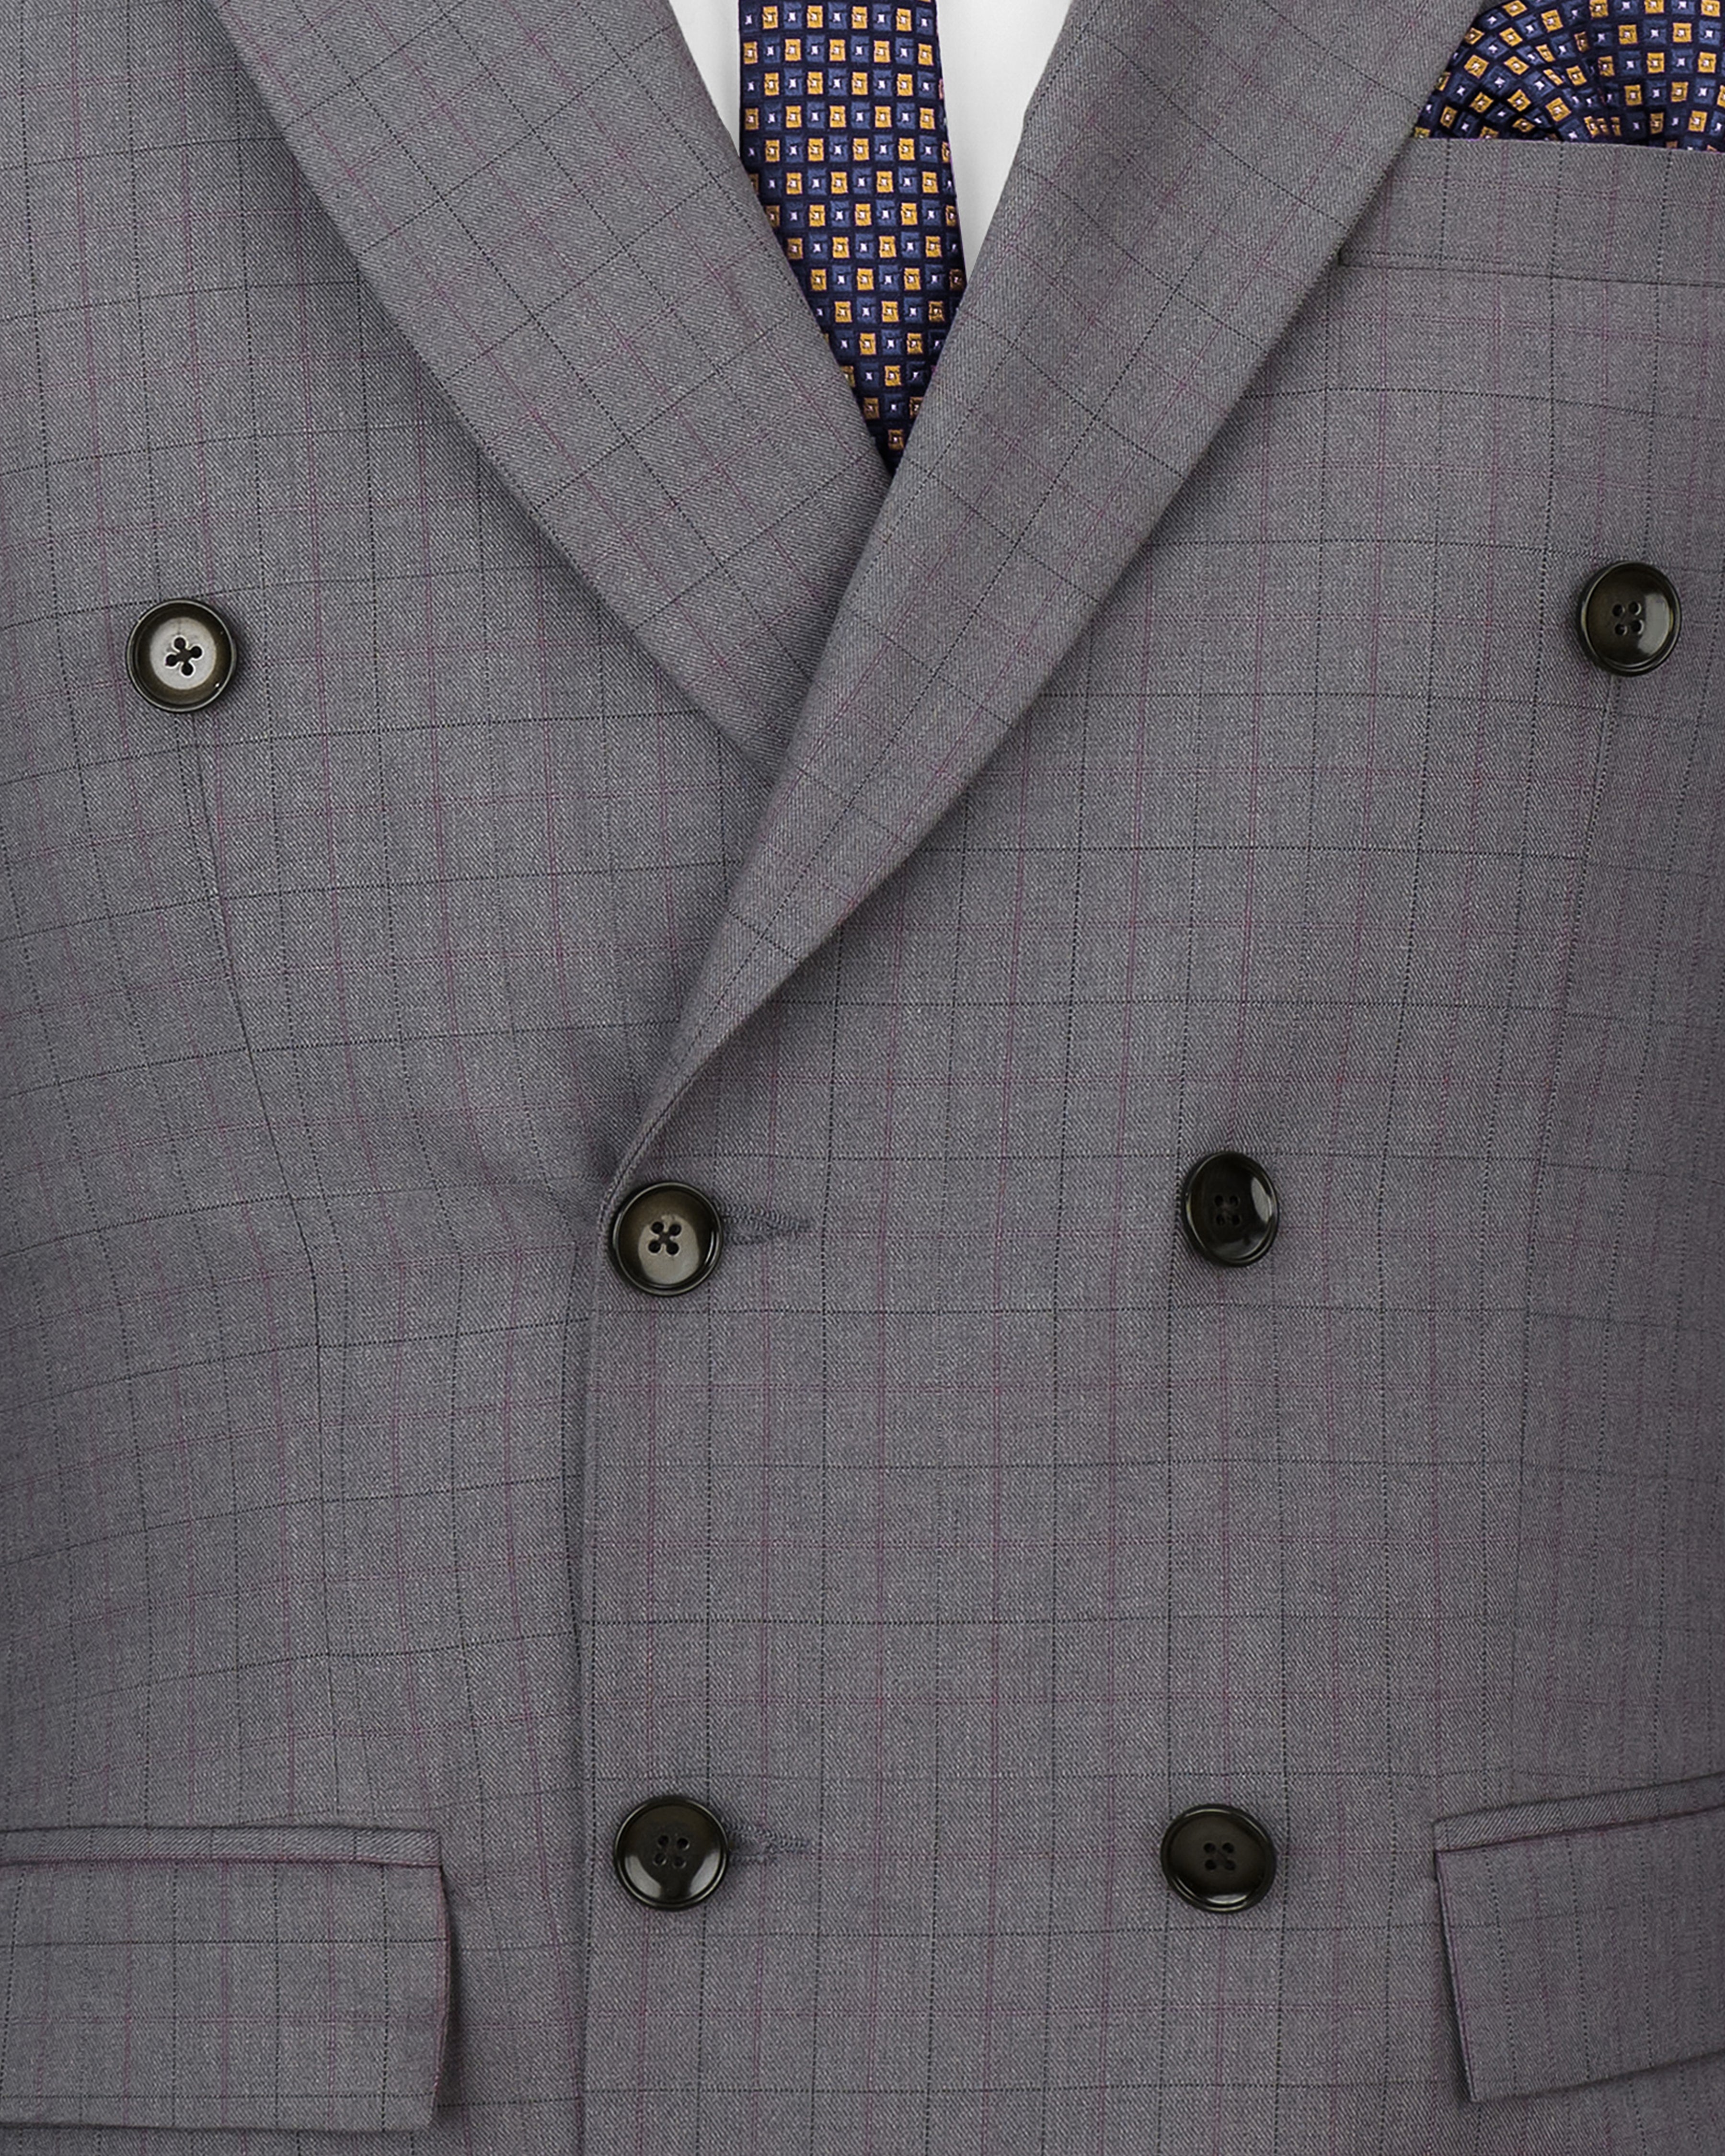 Storm Dust Gray Plaid Double Breasted Suit ST2477-DB-36, ST2477-DB-38, ST2477-DB-40, ST2477-DB-42, ST2477-DB-44, ST2477-DB-46, ST2477-DB-48, ST2477-DB-50, ST2477-DB-52, ST2477-DB-54, ST2477-DB-56, ST2477-DB-58, ST2477-DB-60